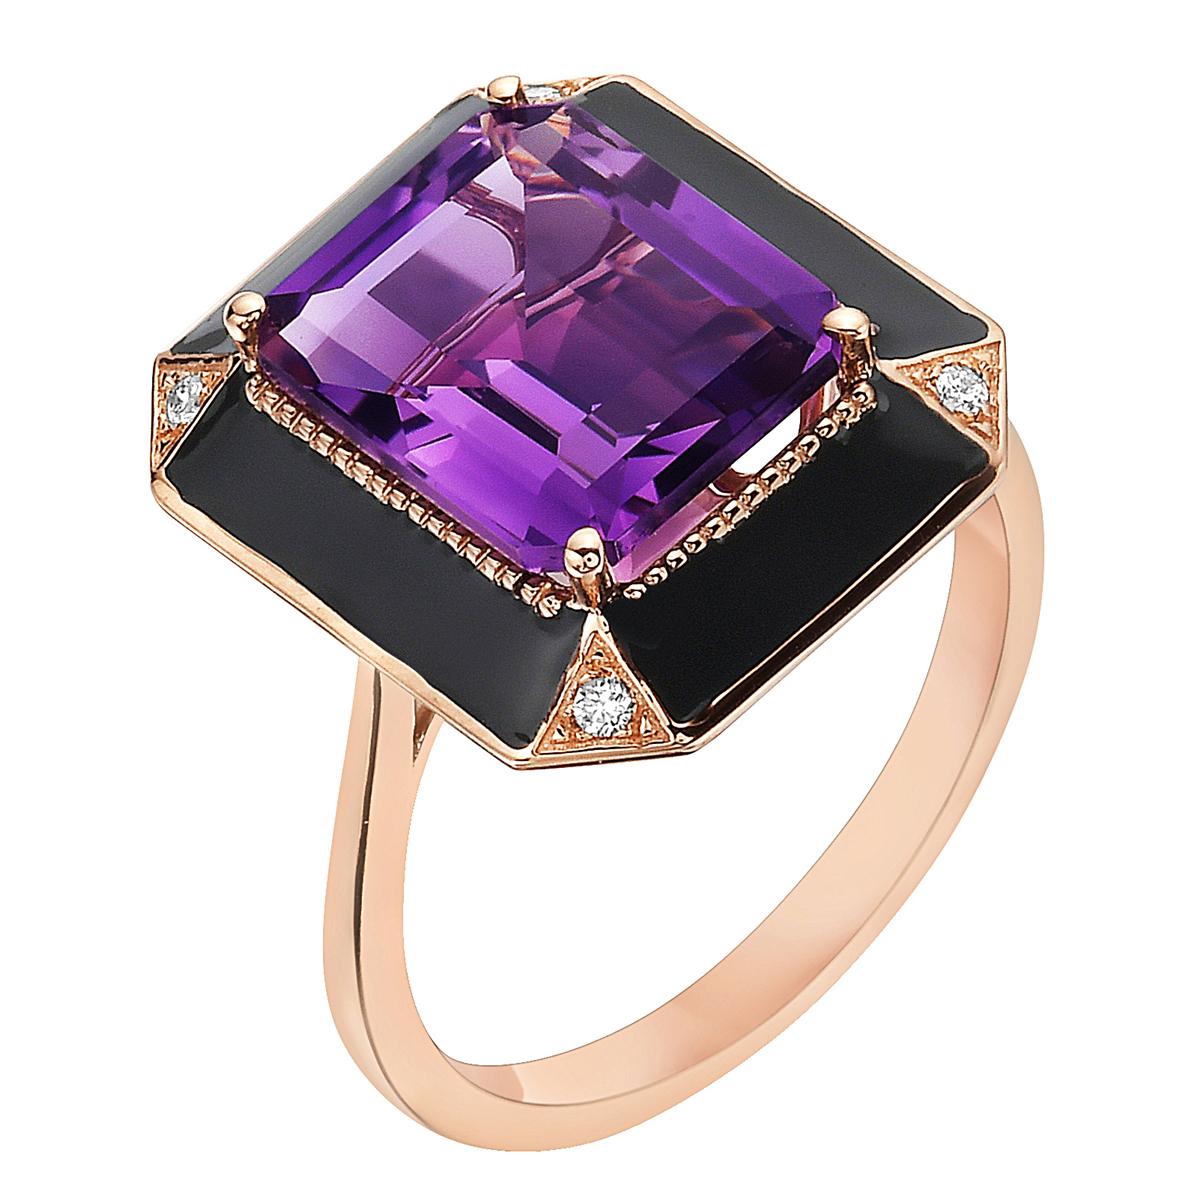 With this exquisite semi-precious amethyst rose gold diamond ring, style and glamour are in the spotlight. This 18-karat emerald cut ring is made from 4.04 grams of gold, 1 amethyst totaling 3.87 karats, and is surrounded by black enamel and has 4